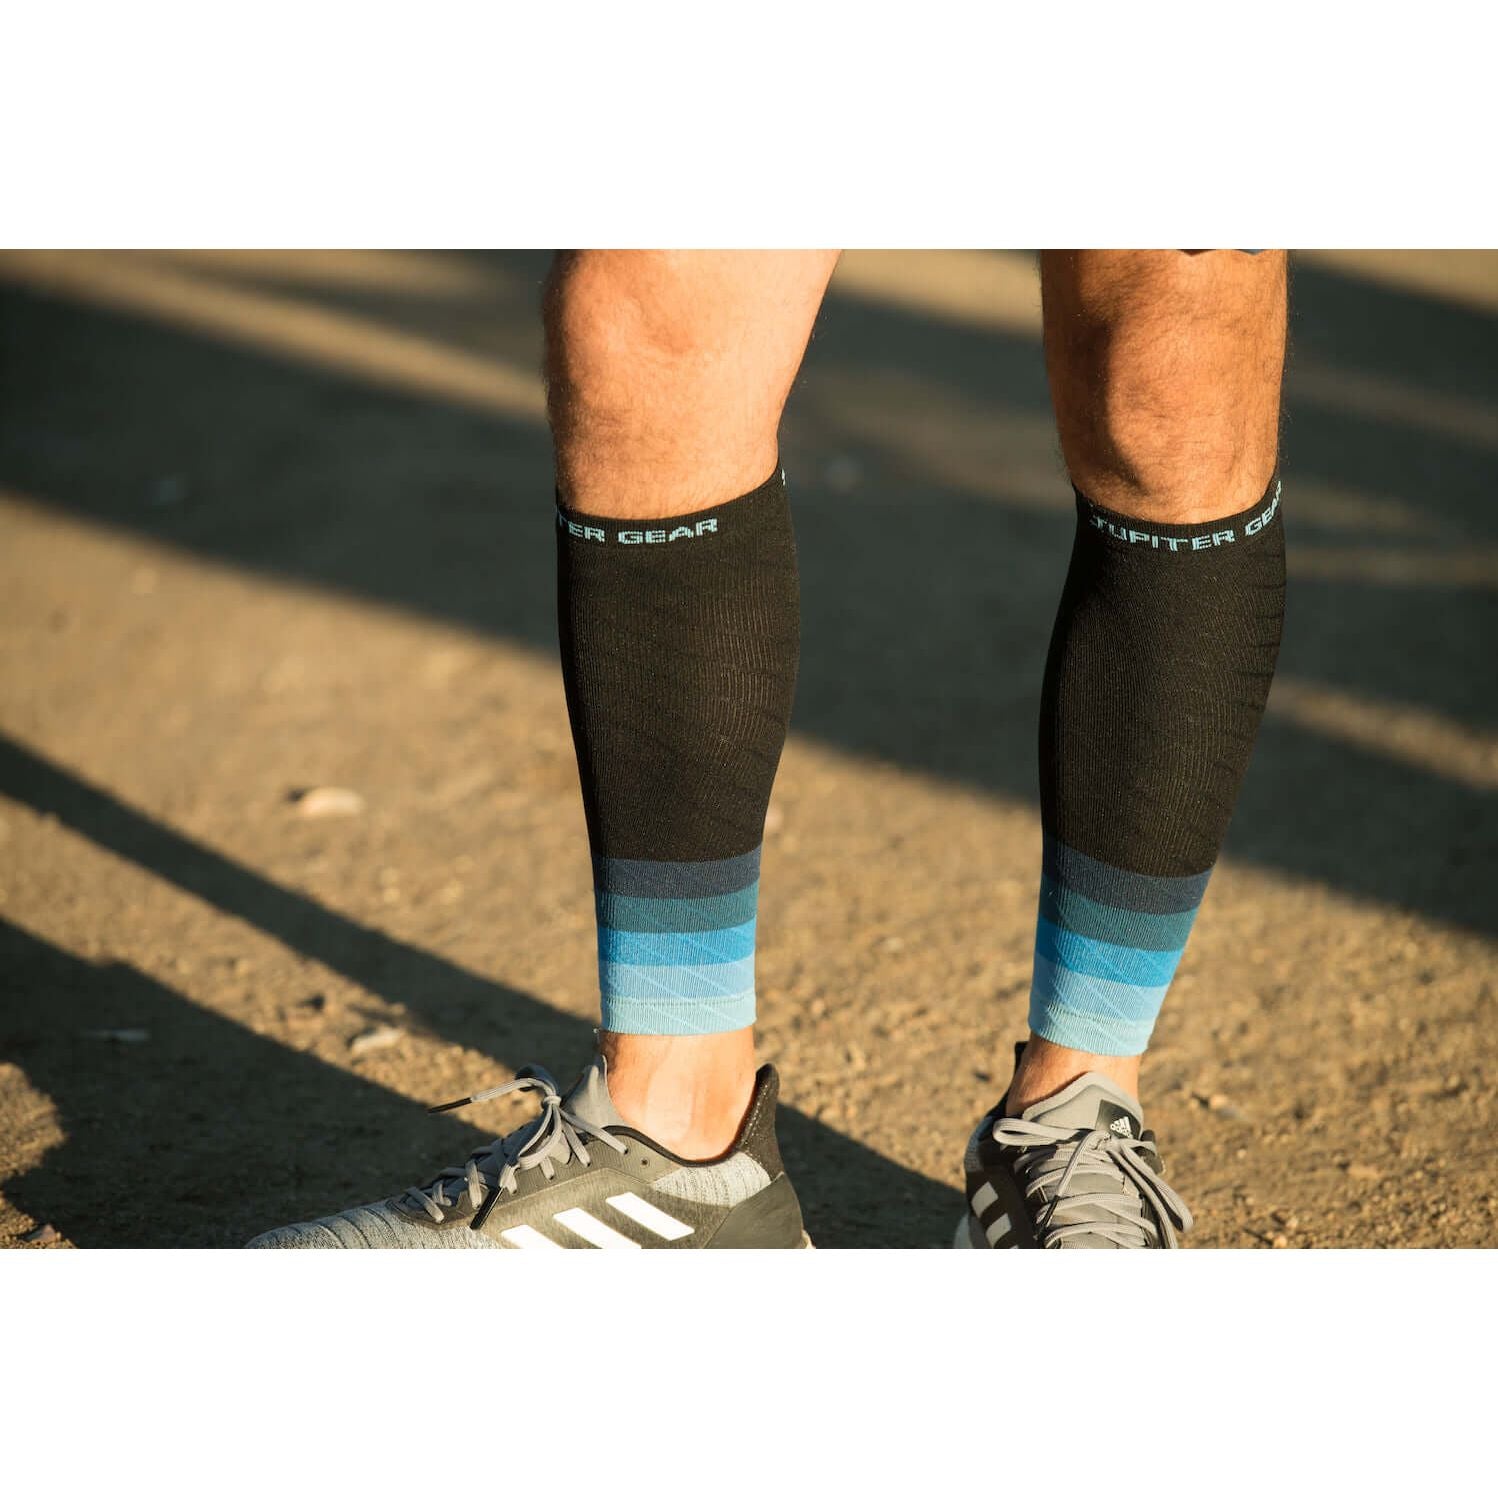 Endurance Compression Calf & Leg Sleeve for Running and Hiking - KME means the very best